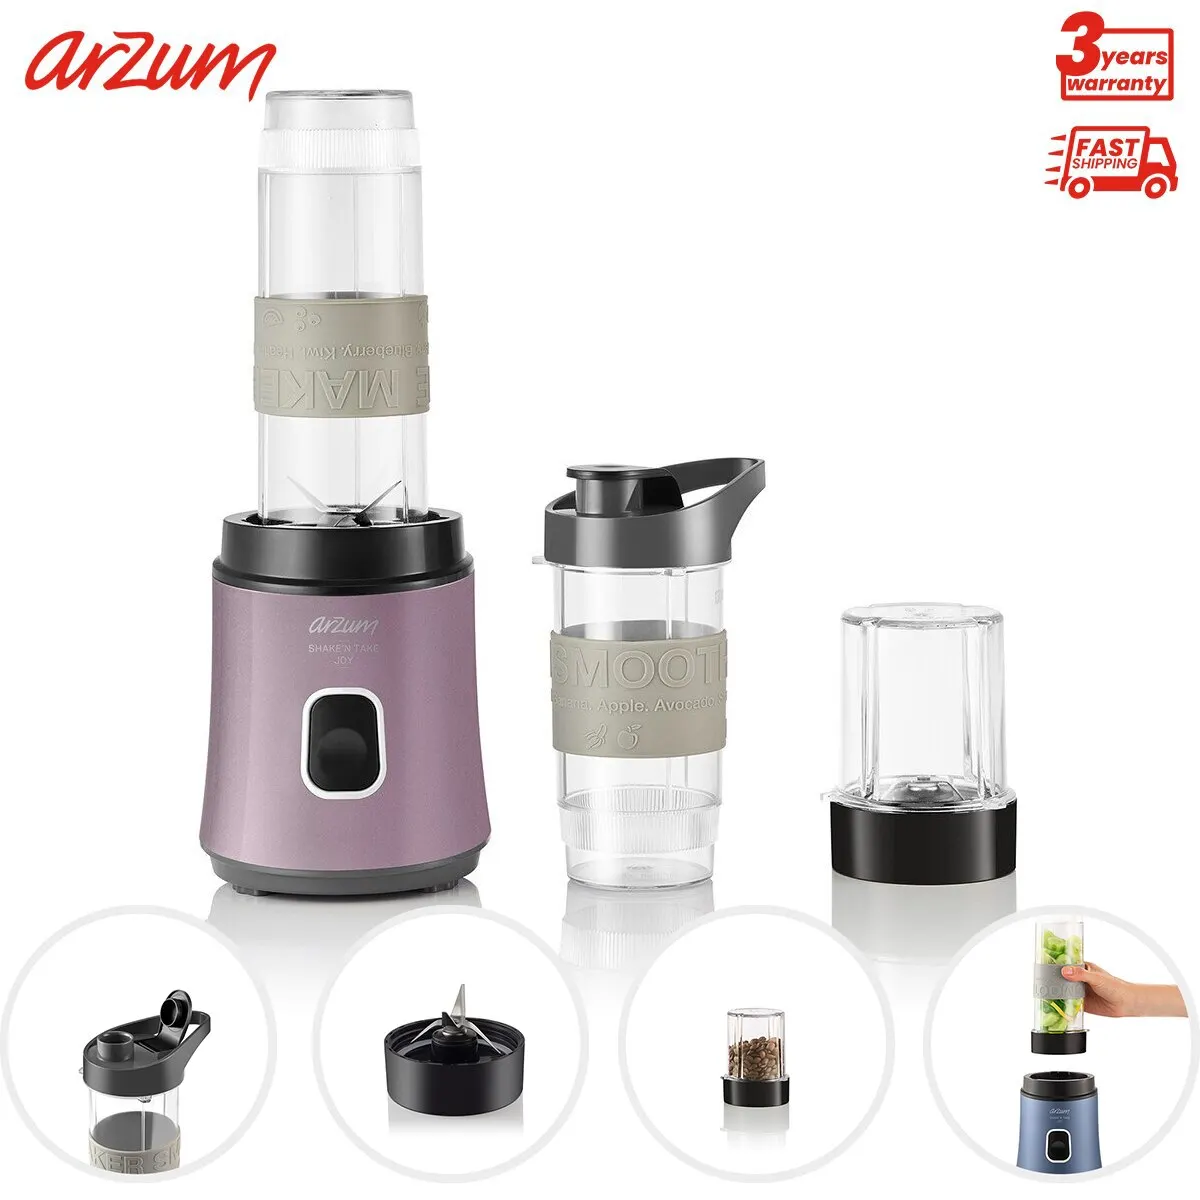 

ARZUM AR1001 Blender Take Personal Electric Blender Smoothie Maker Mixer Portable Cup Ergonomic Dripping Anti Cover